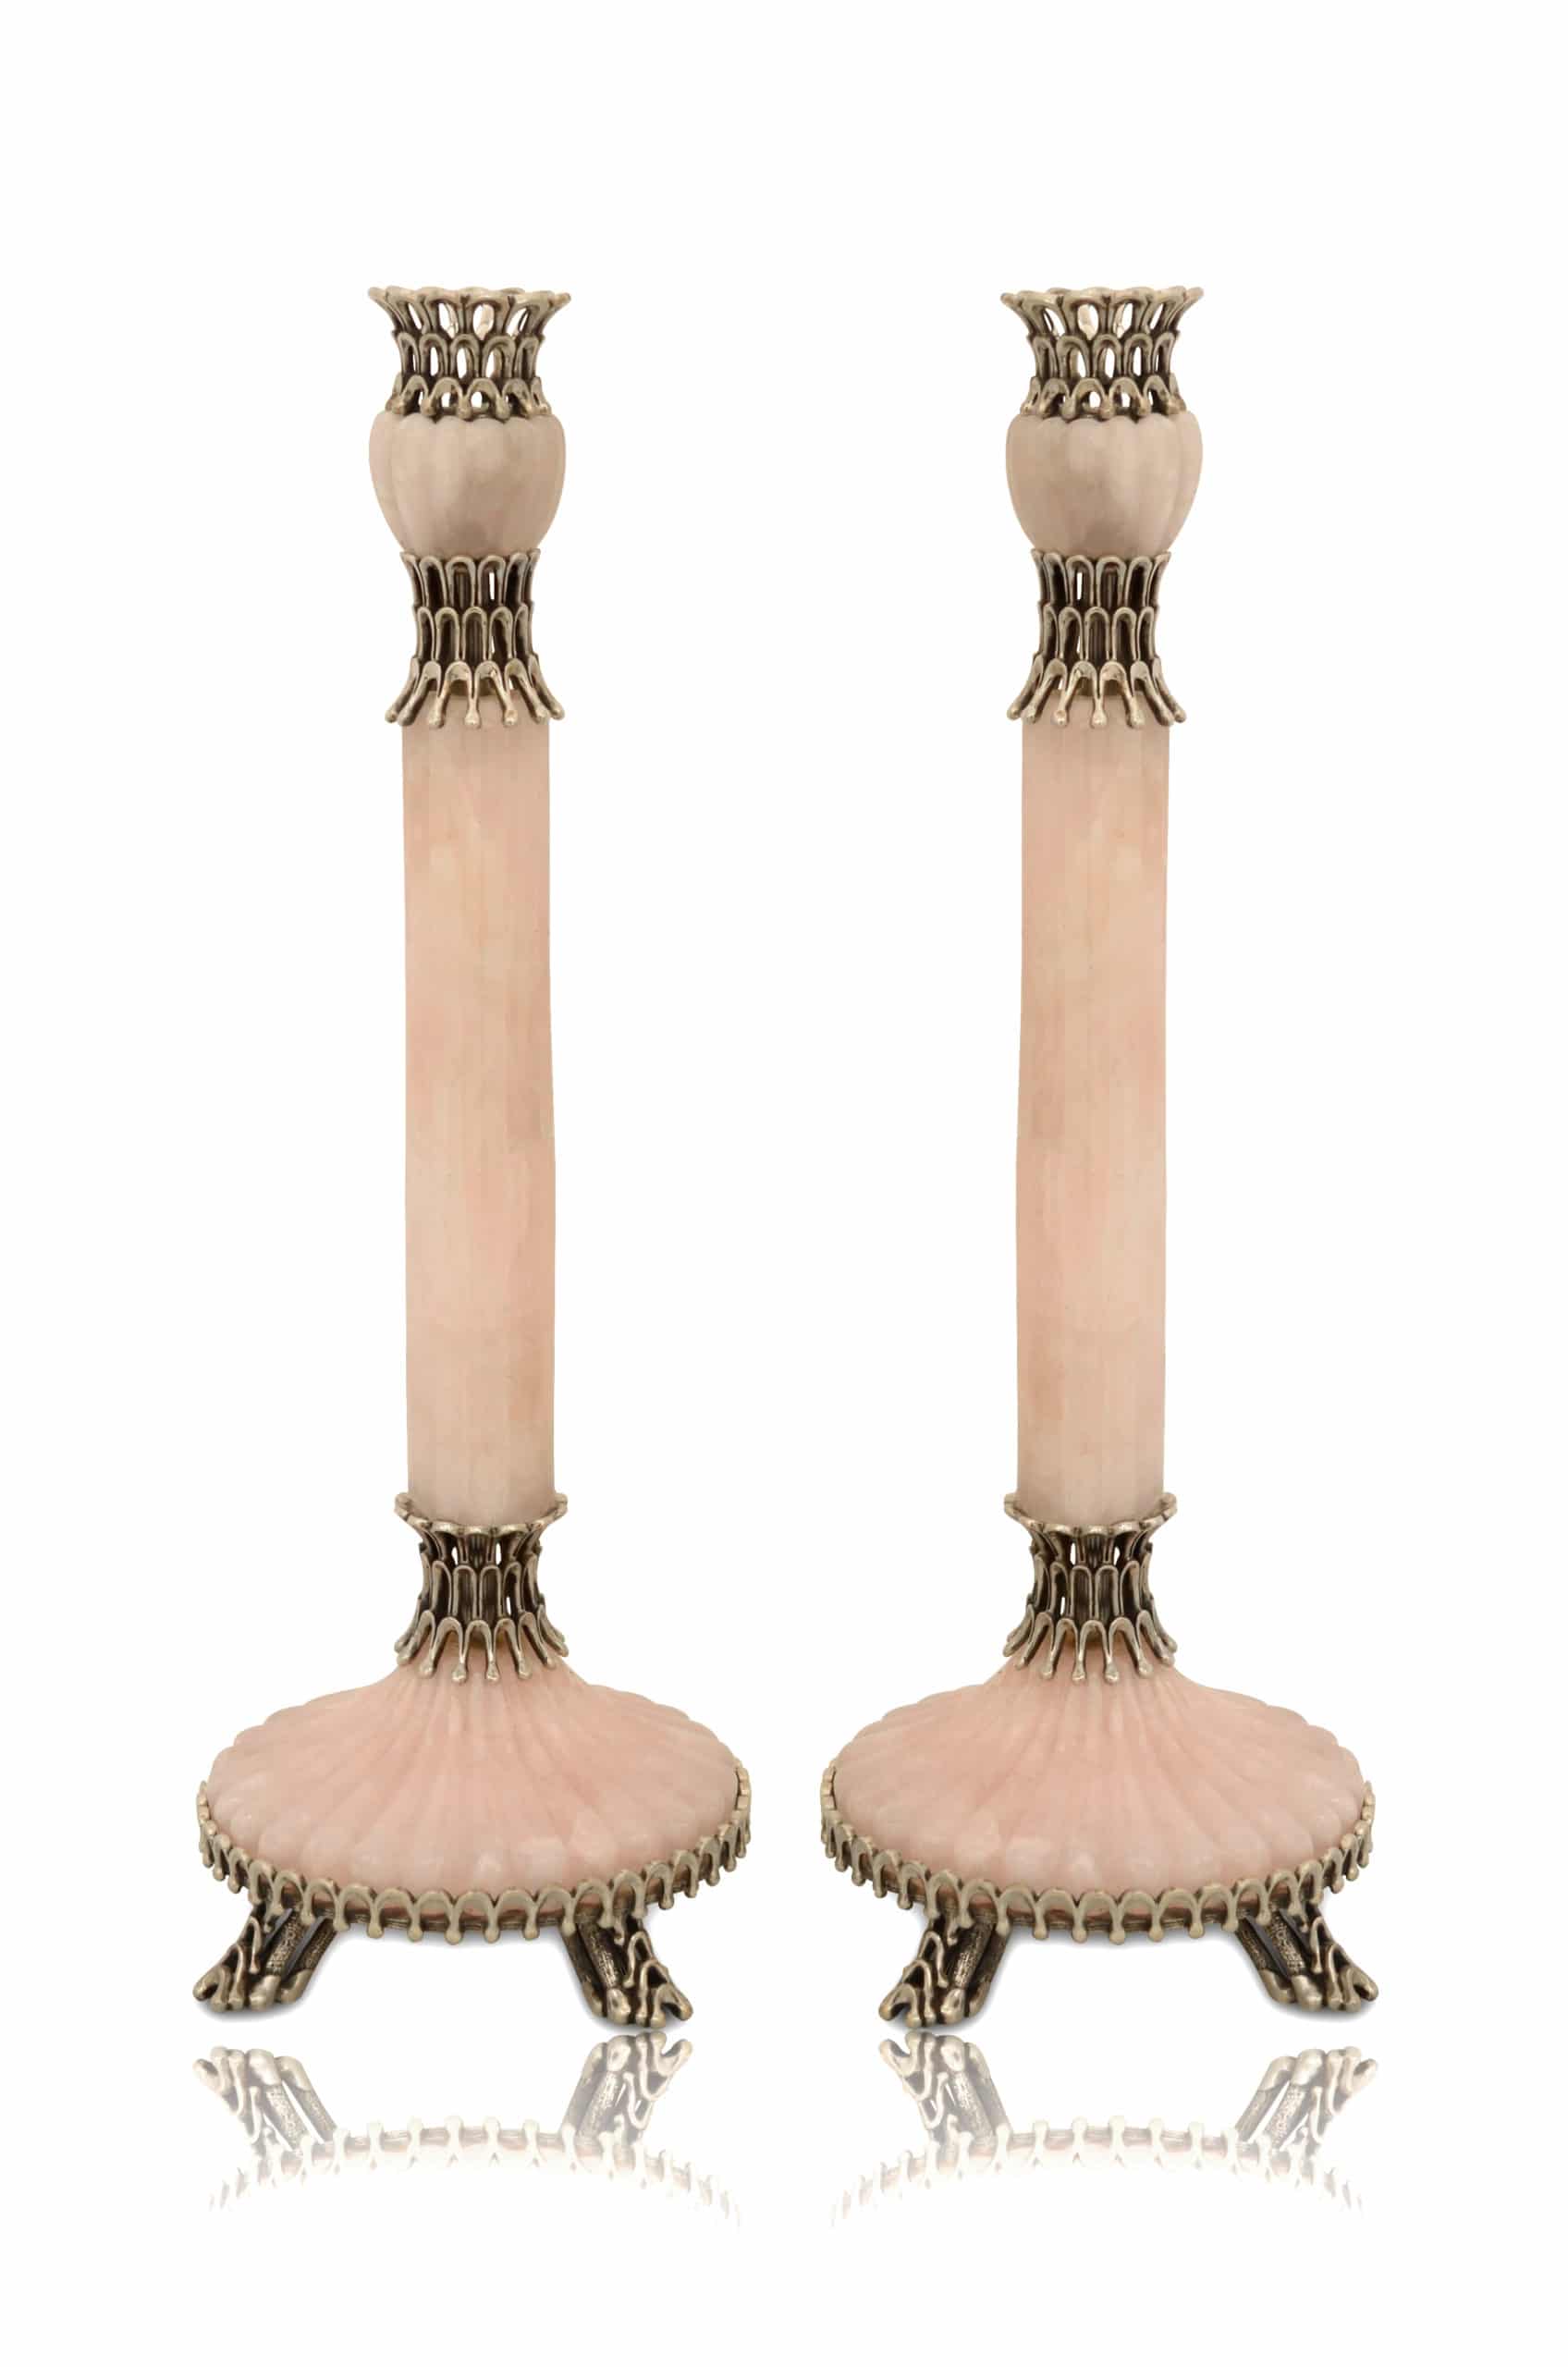 Large Sterling Silver & Onyx Candlesticks